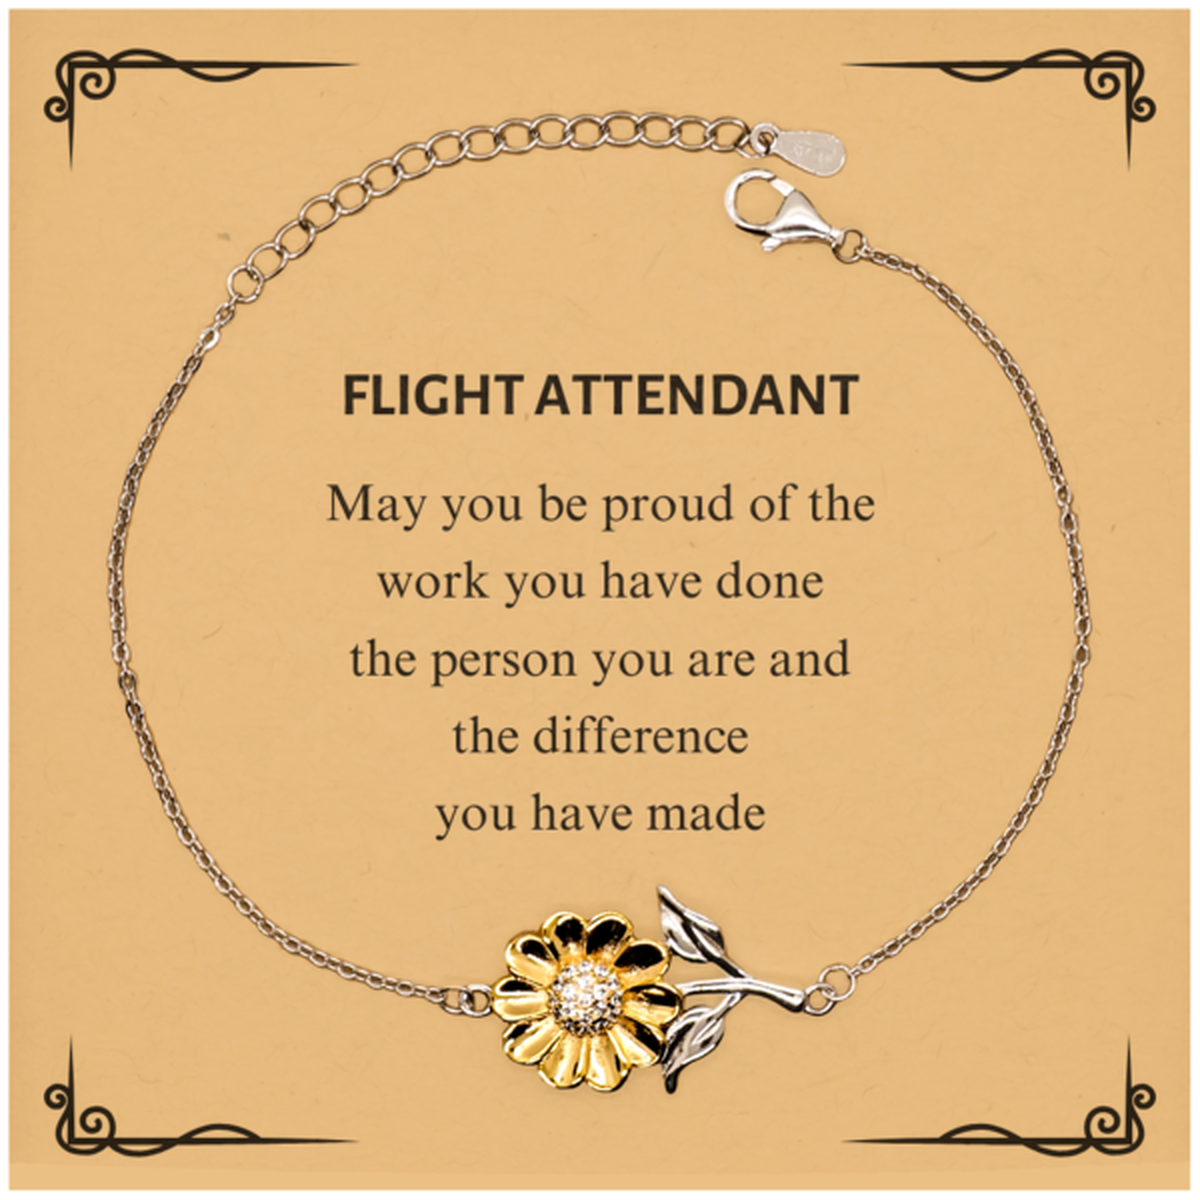 Flight Attendant May you be proud of the work you have done, Retirement Flight Attendant Sunflower Bracelet for Colleague Appreciation Gifts Amazing for Flight Attendant